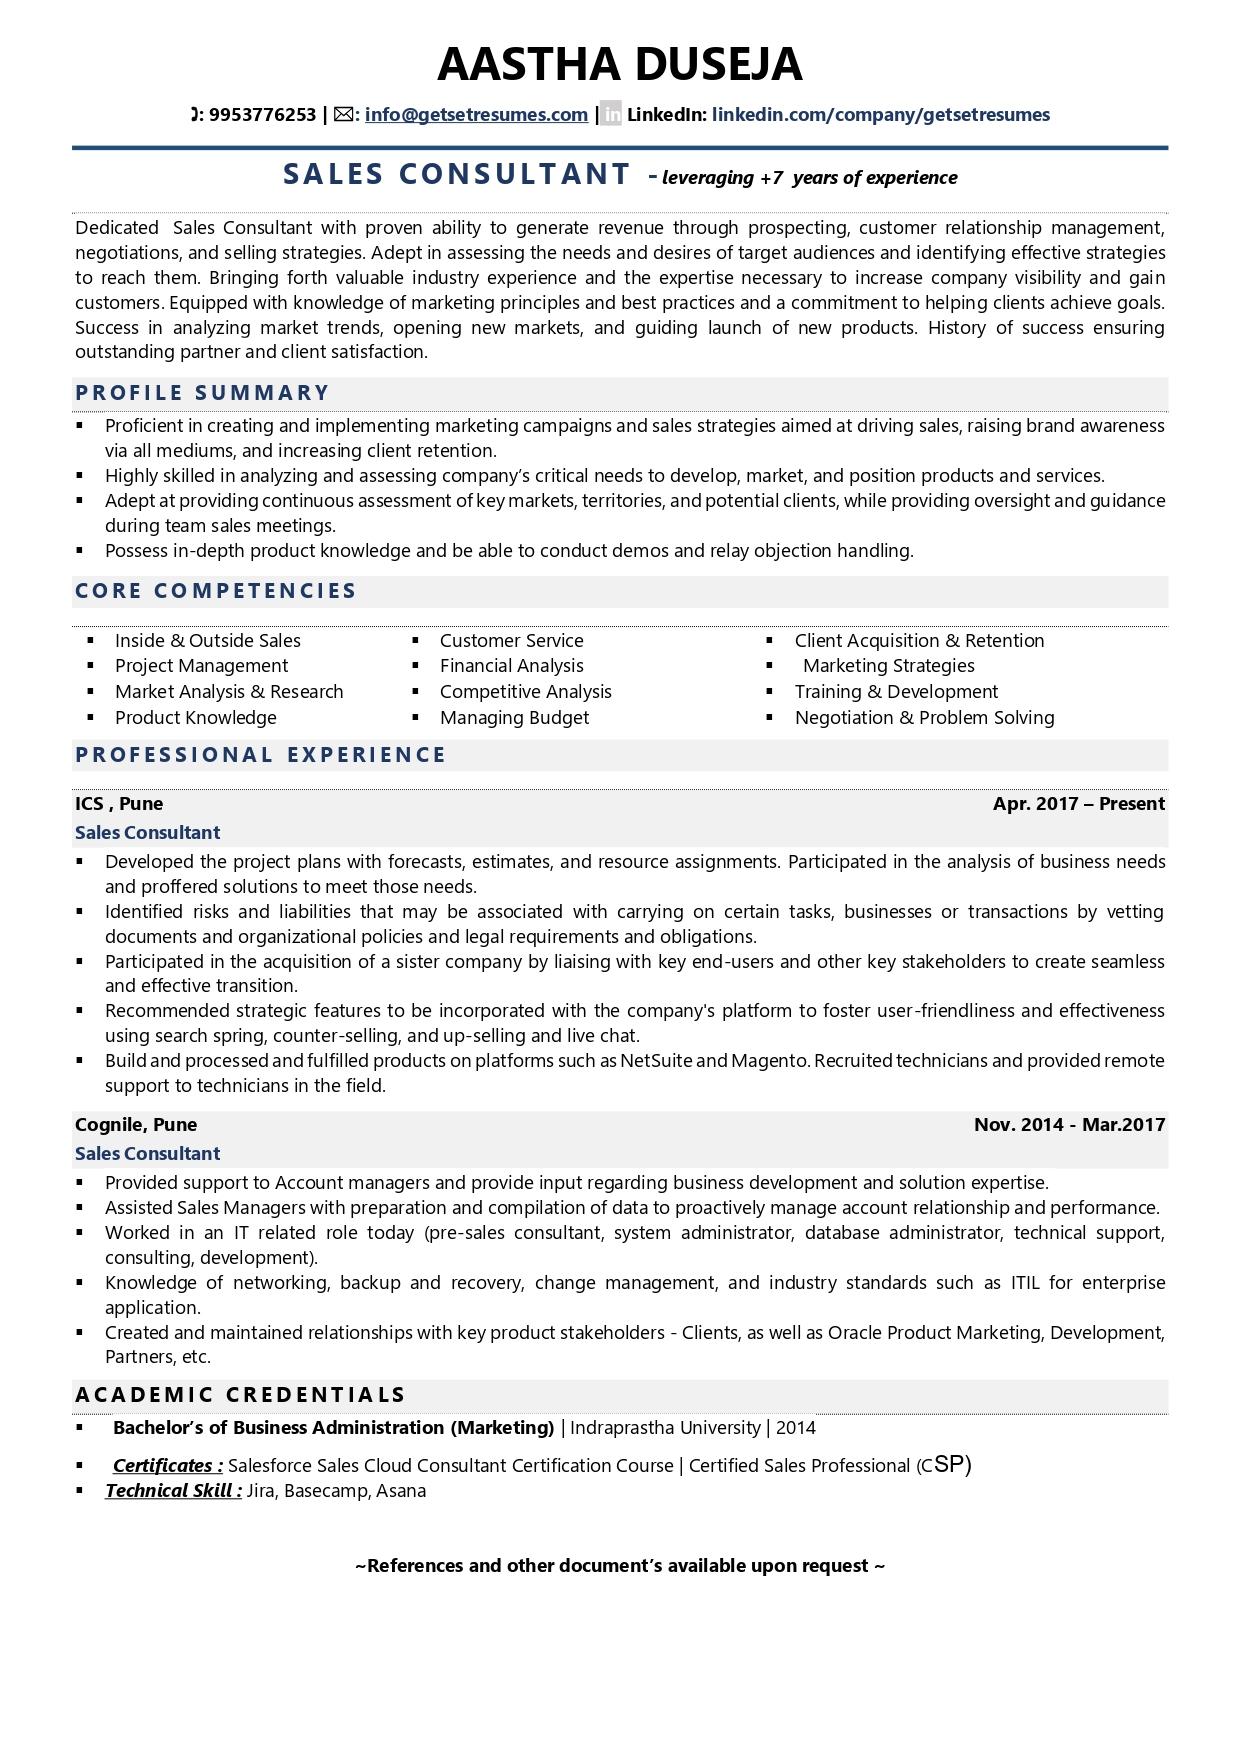 Sales Consultant - Resume Example & Template